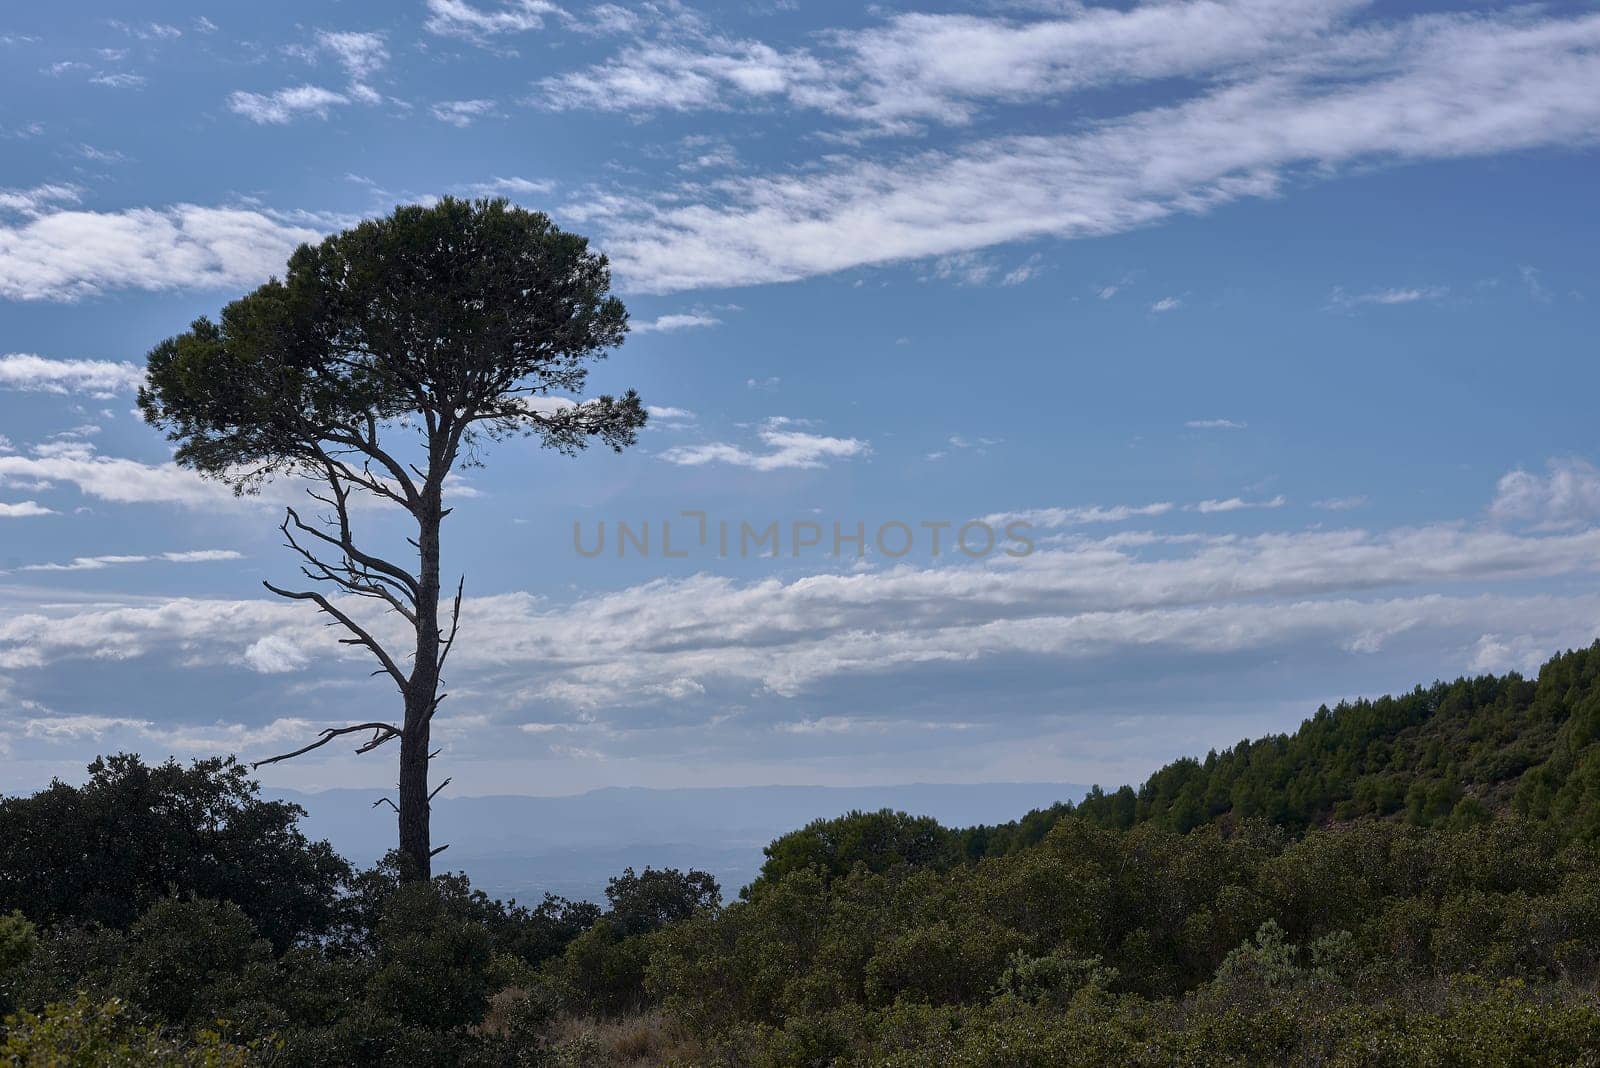 A large pine tree surrounded by low vegetation.Empty space, clouds, dry branches, luminous sky, environment conservation